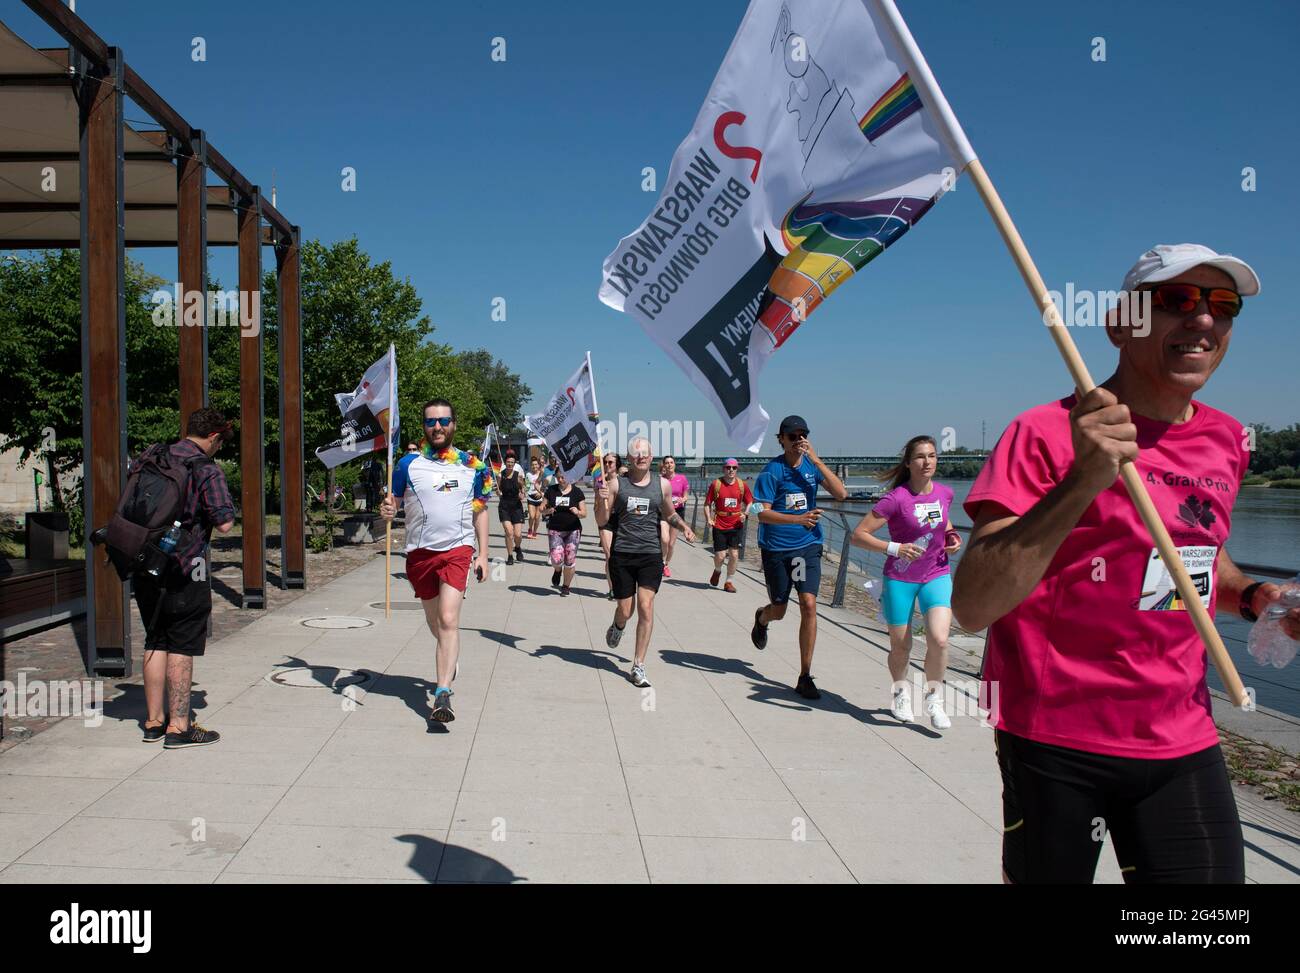 Warsaw, Warsaw, Poland. 19th June, 2021. Participants of the Equality Jog hold flags while running on June 19, 2021 in Warsaw, Poland. A dozen of people participated in the 2nd Equality Jog, organised by the activist group Homokomando, that consists in a 5 Km route and takes place before the Warsaw's Pride Parade. Credit: Aleksander Kalka/ZUMA Wire/Alamy Live News Stock Photo